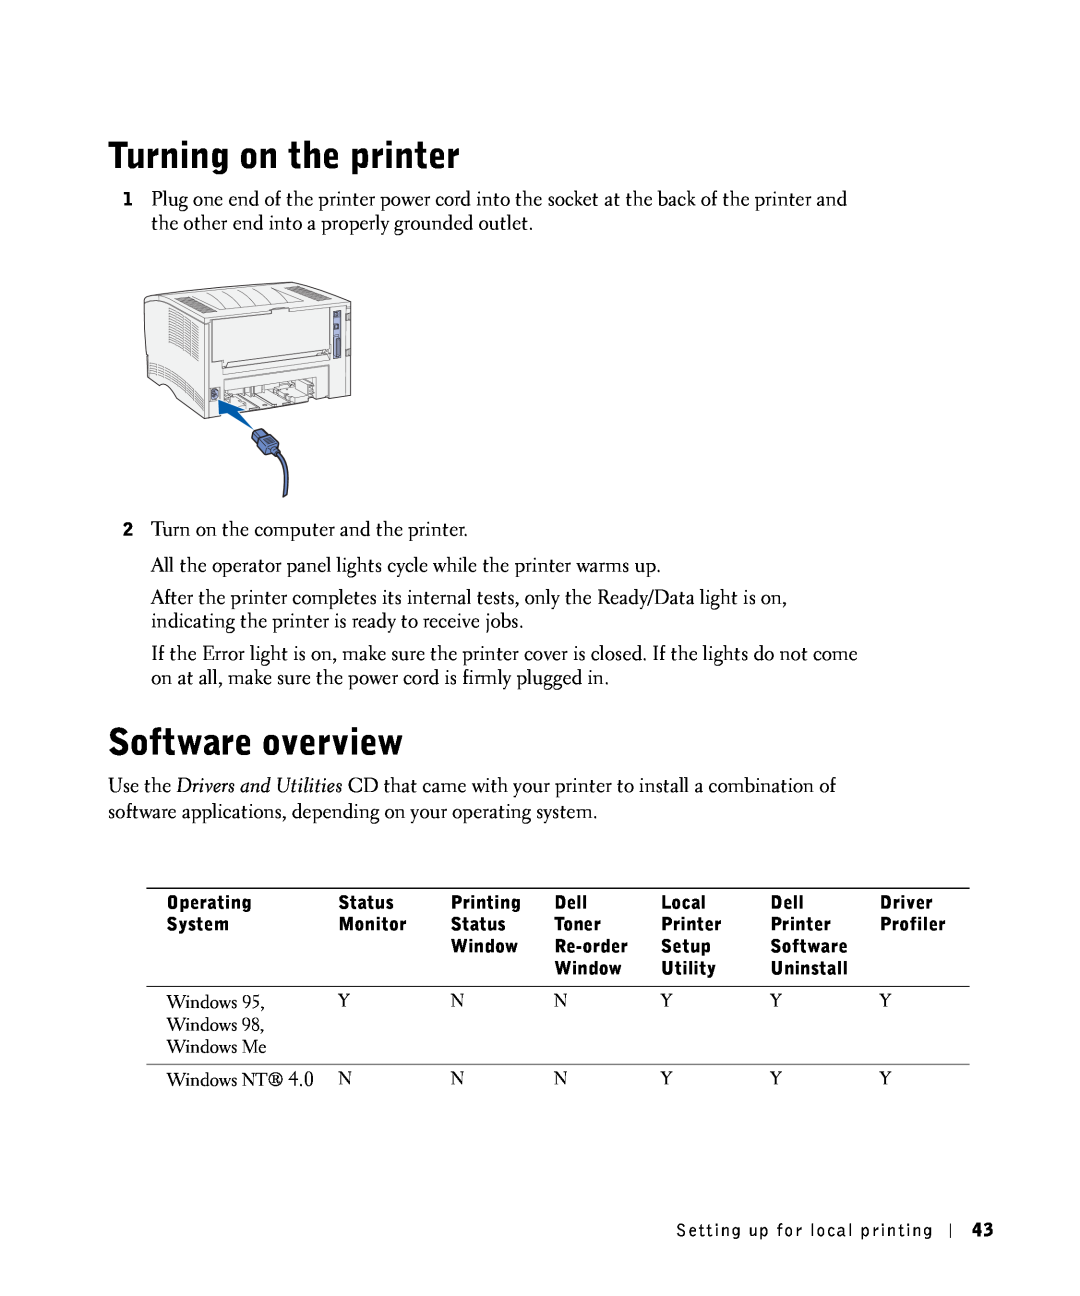 Dell S2500 owner manual Turning on the printer, Software overview 